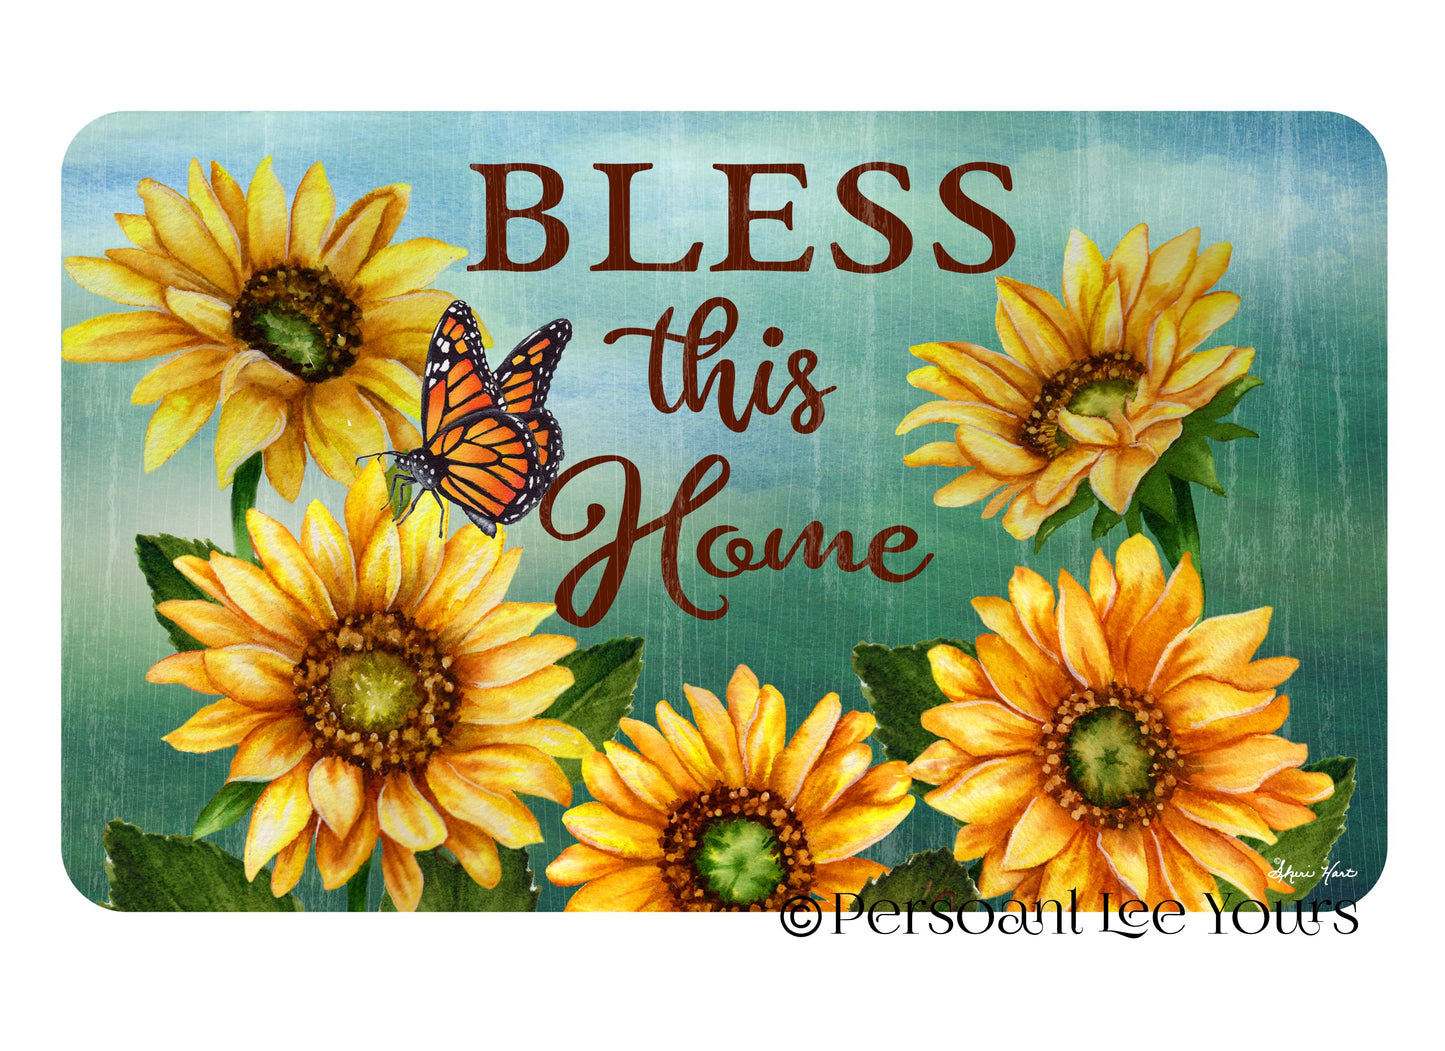 Wreath Sign * Bless This Home * Sunflowers On Teal * 3 Sizes * Lightweight Metal